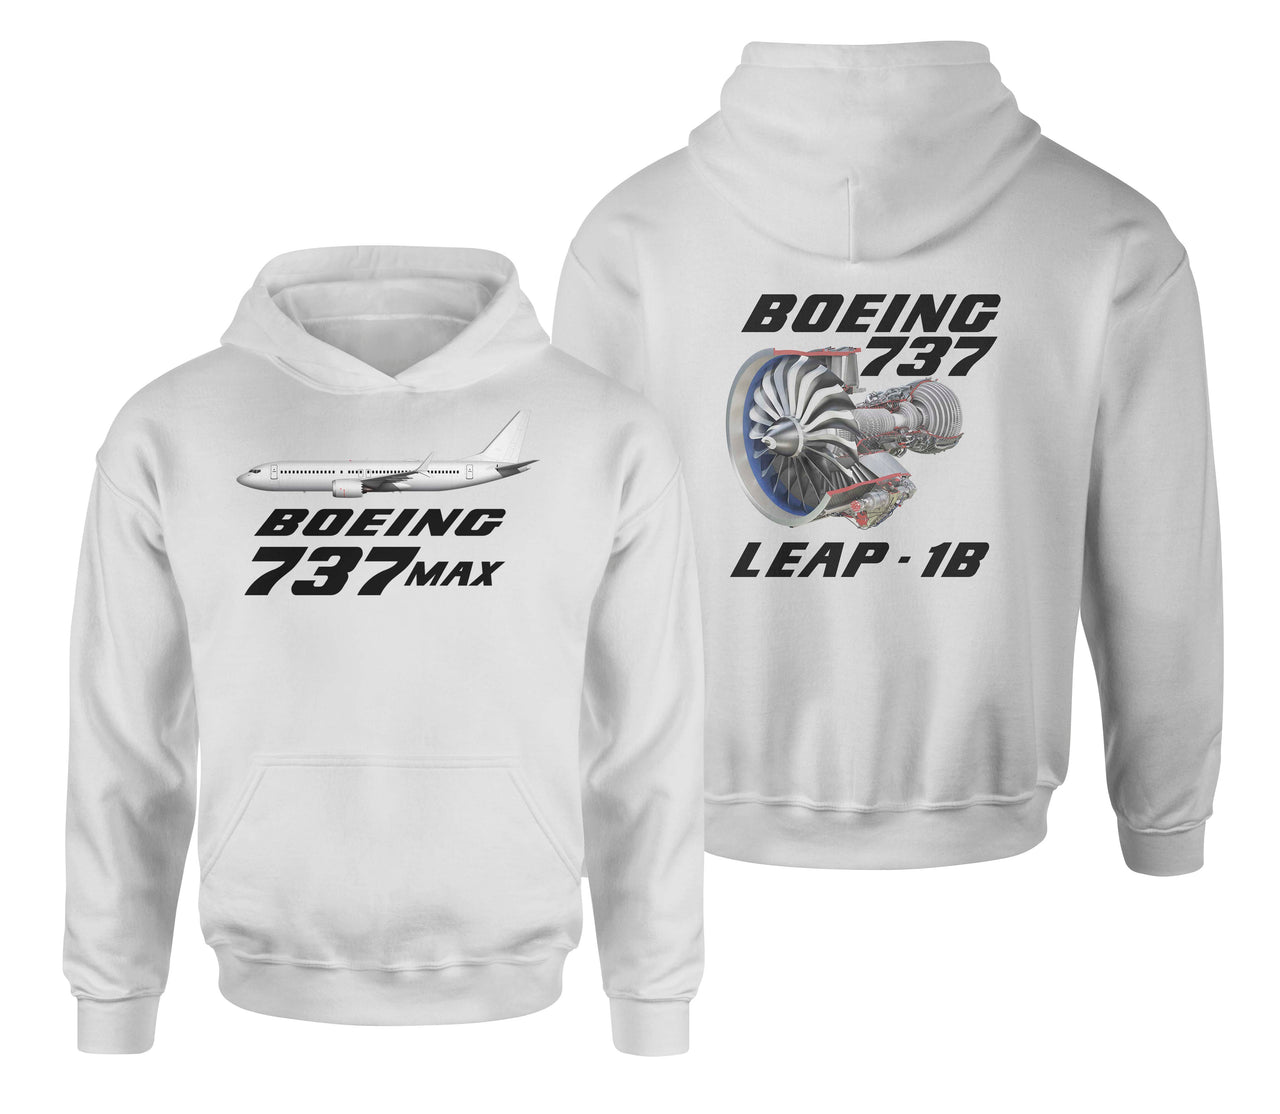 Boeing 737Max & Leap 1B Designed Double Side Hoodies